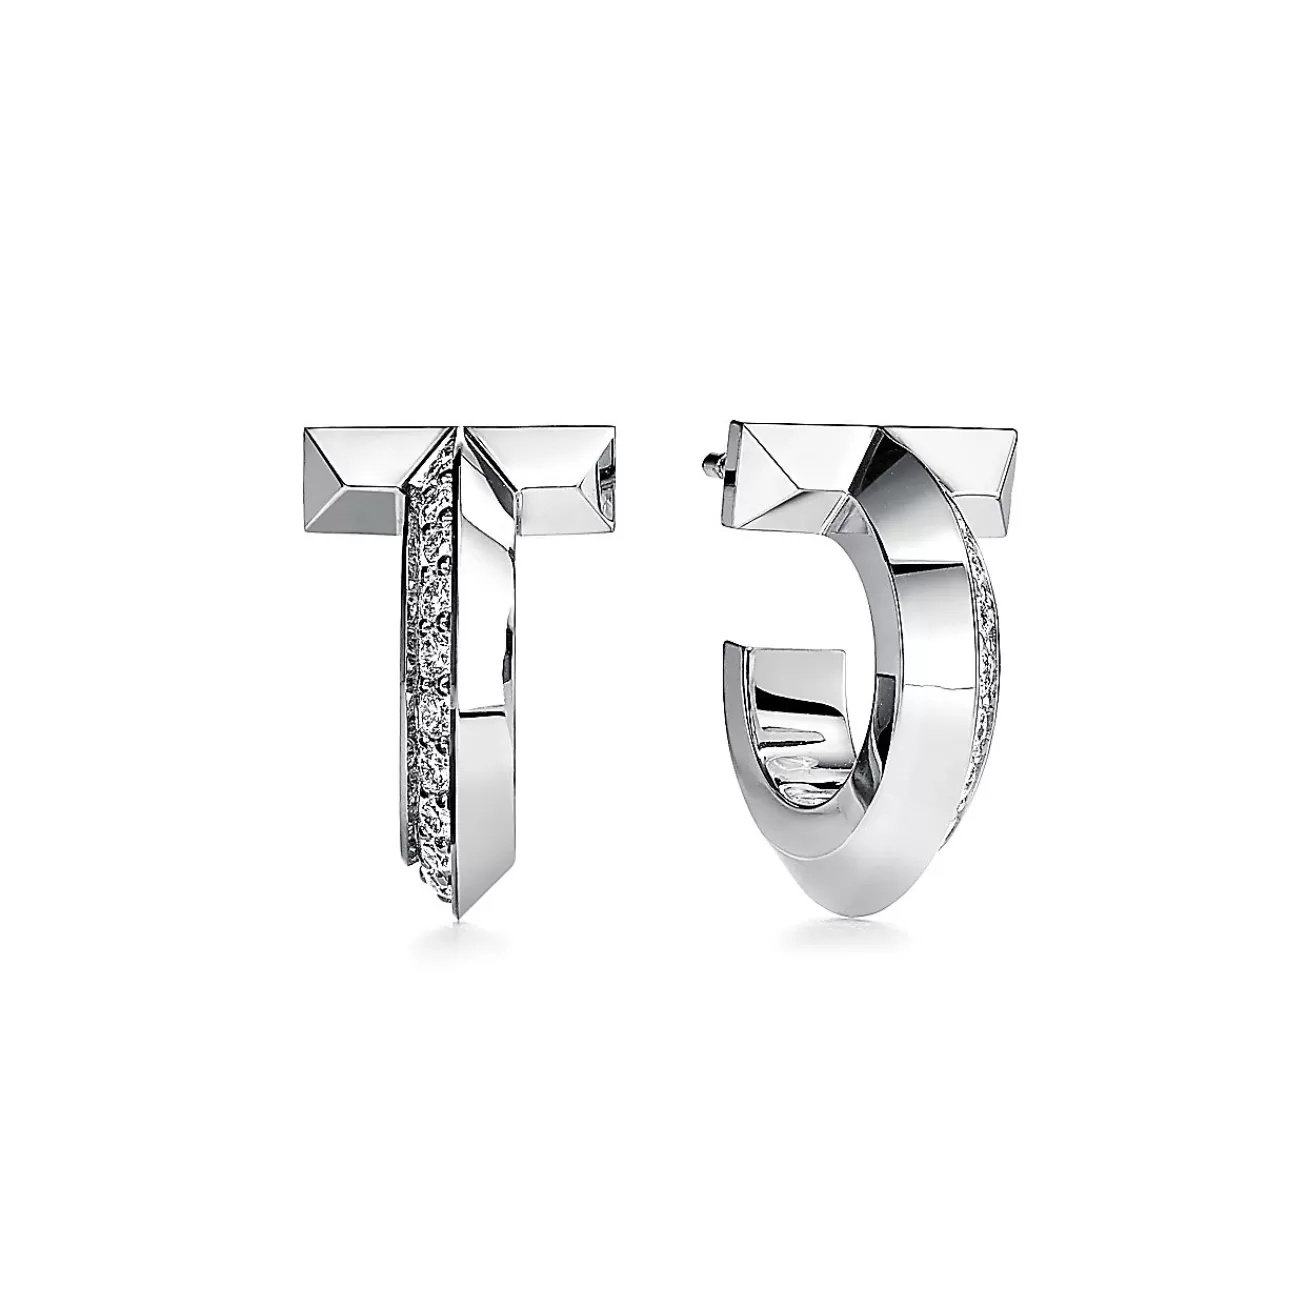 Tiffany & Co. Tiffany T T1 Hoop Earrings in White Gold with Diamonds | ^ Earrings | Gifts for Her